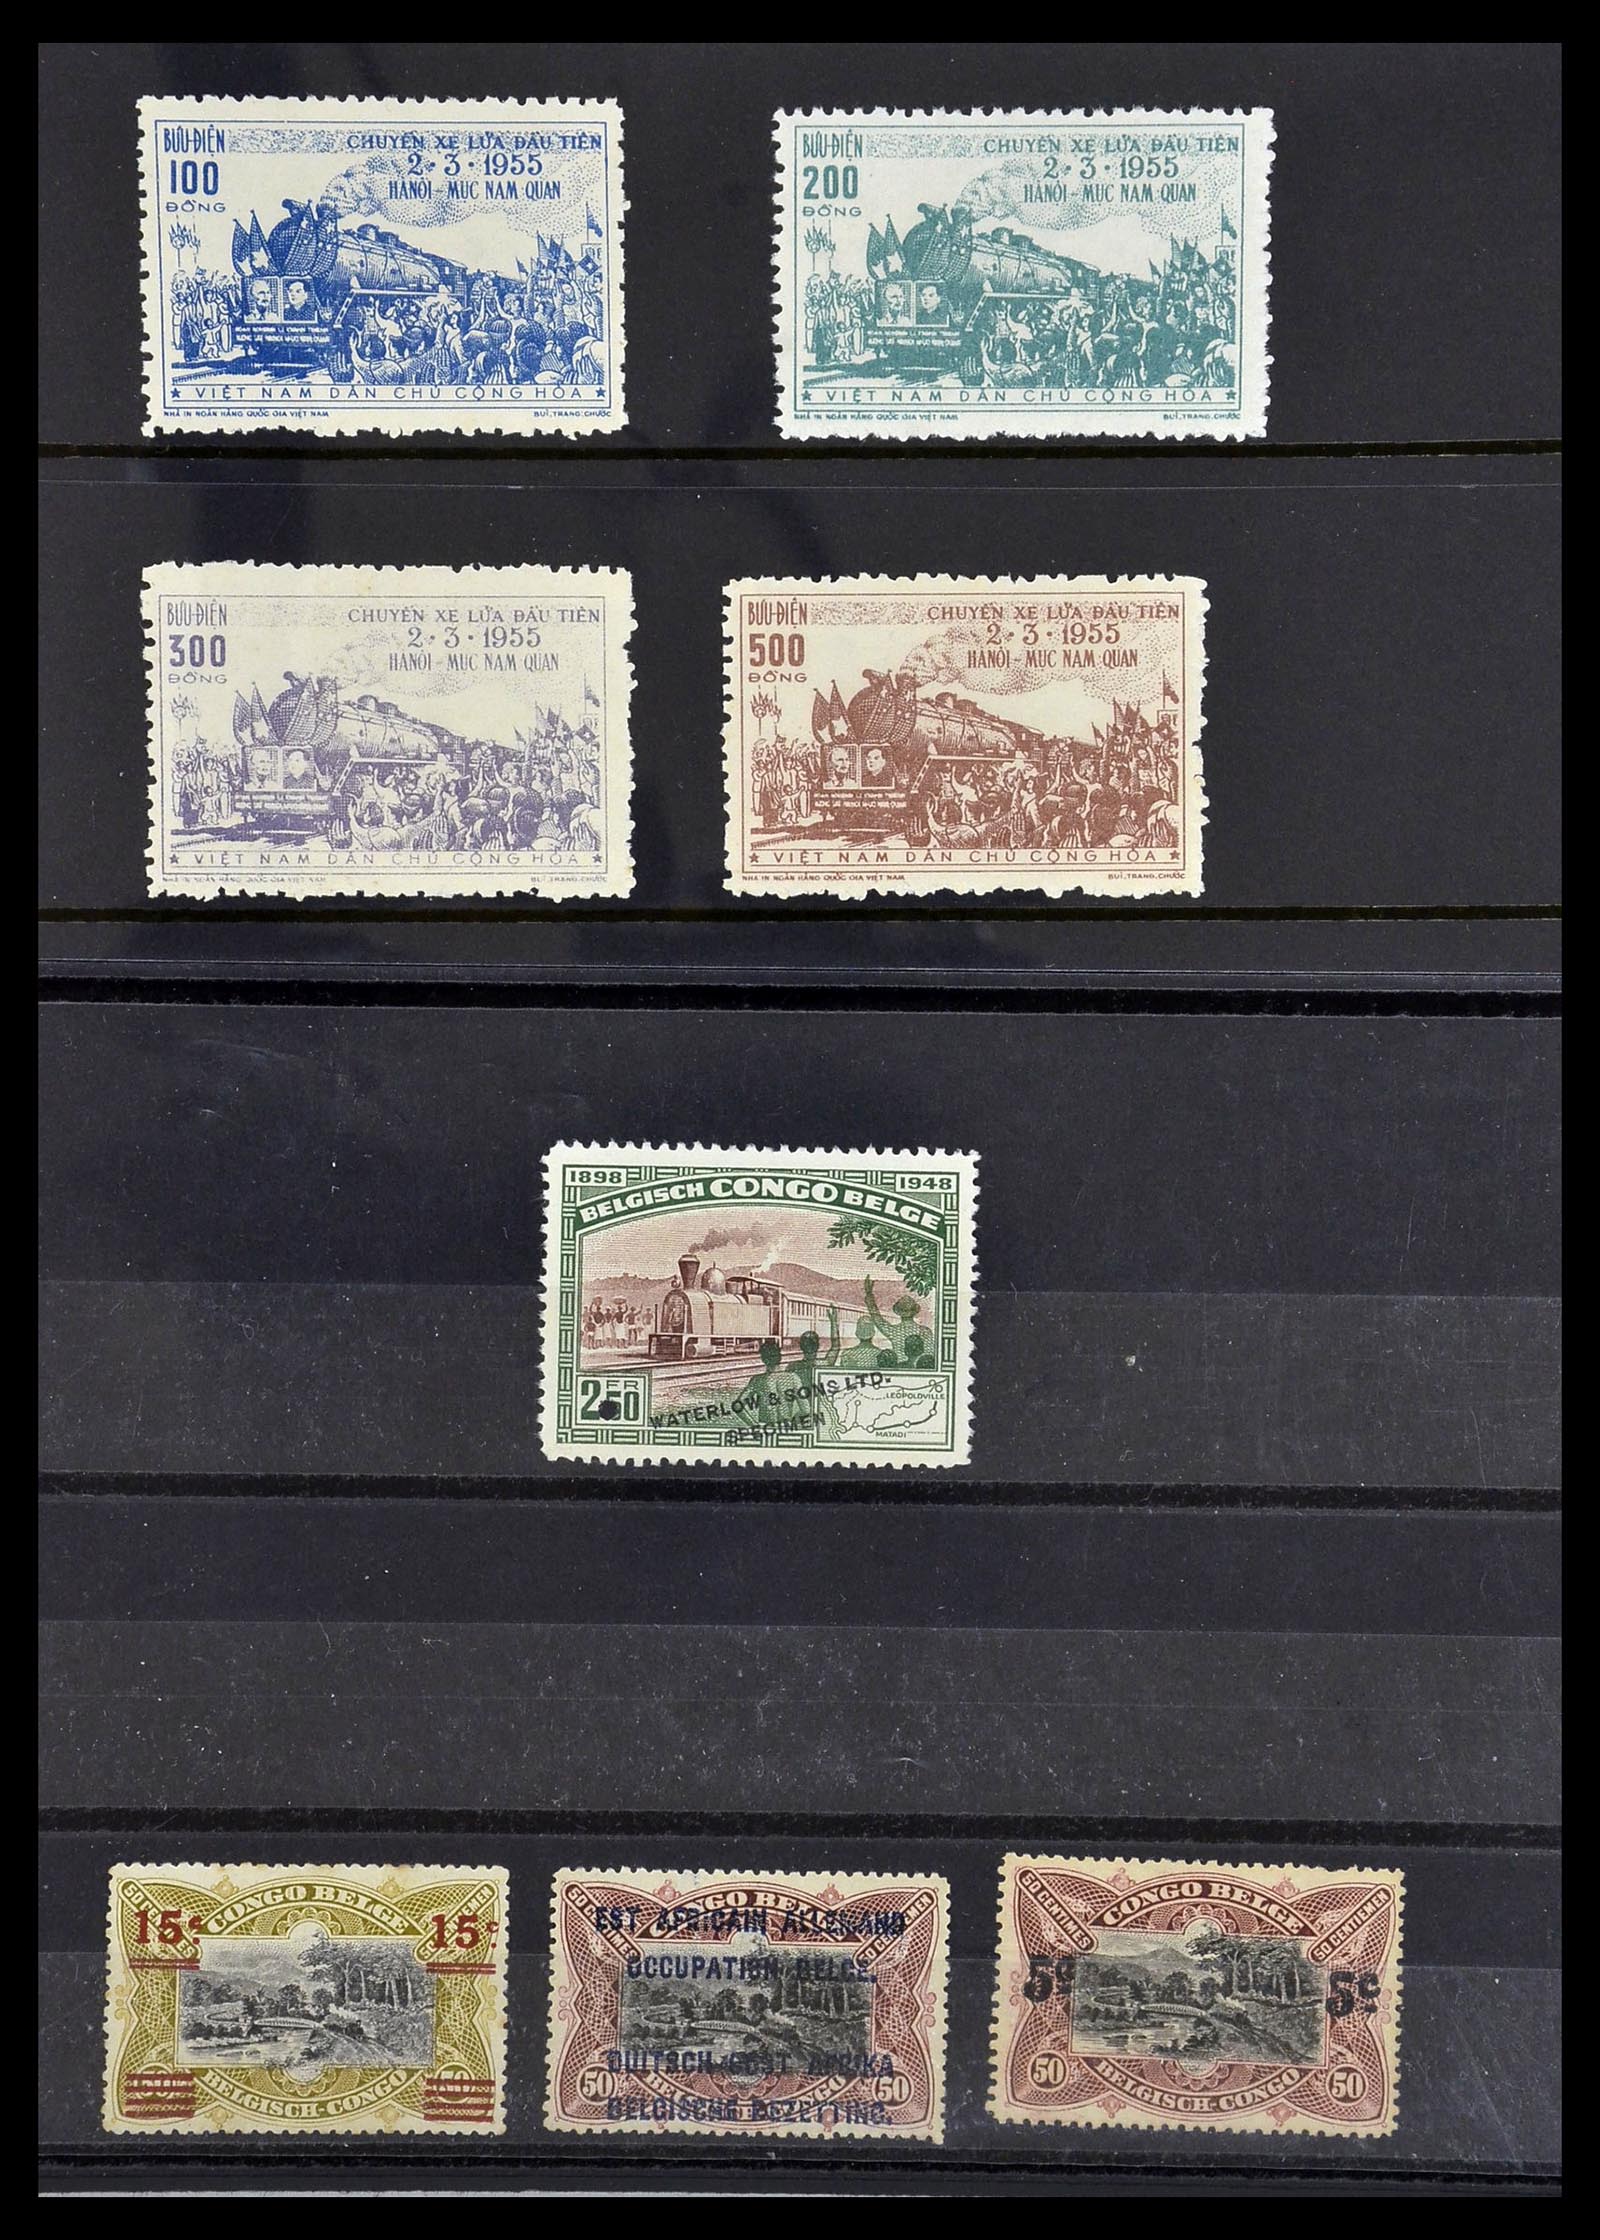 33757 012 - Stamp collection 33757 Thematics Trains.